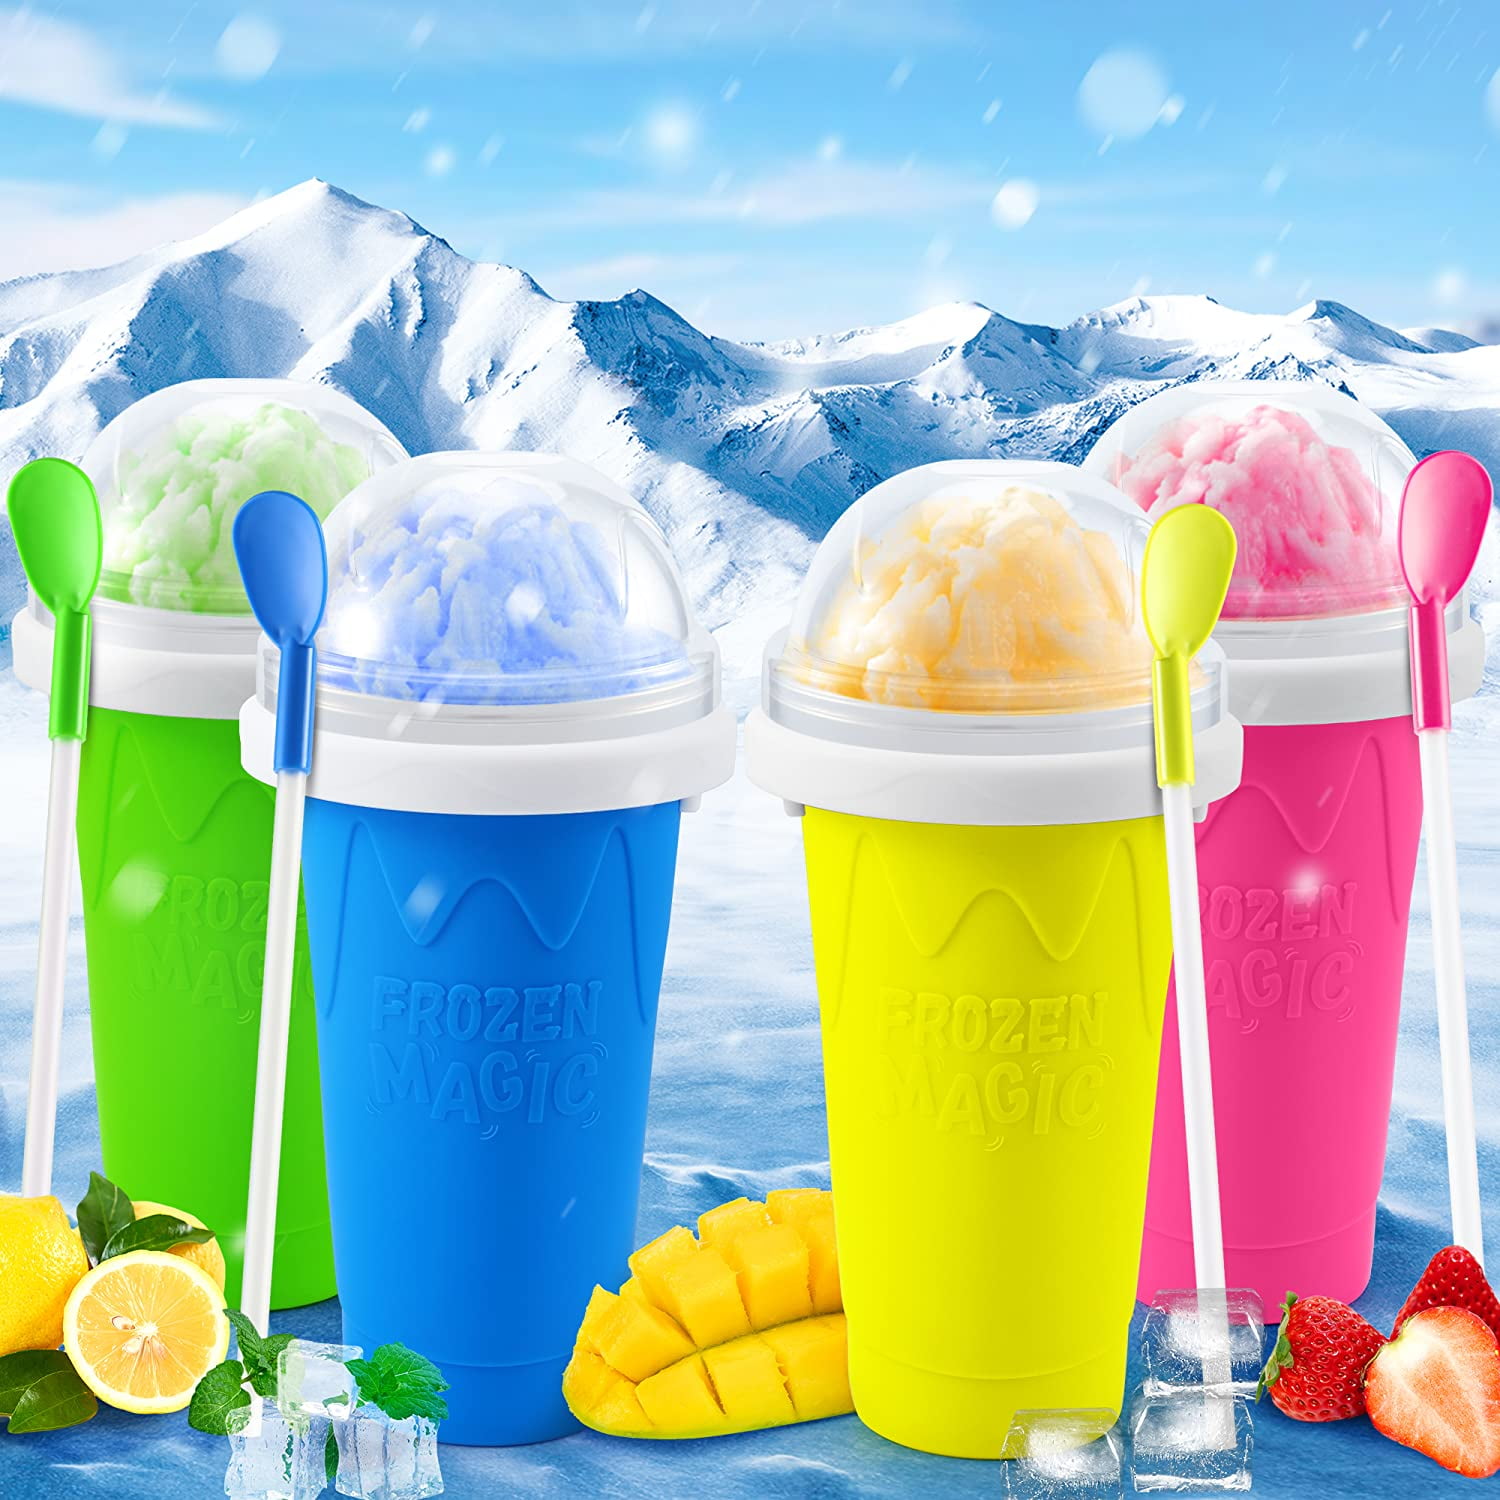  KTEBO Frozen Magic Slushy Cup, Smoothie Cups with Lids